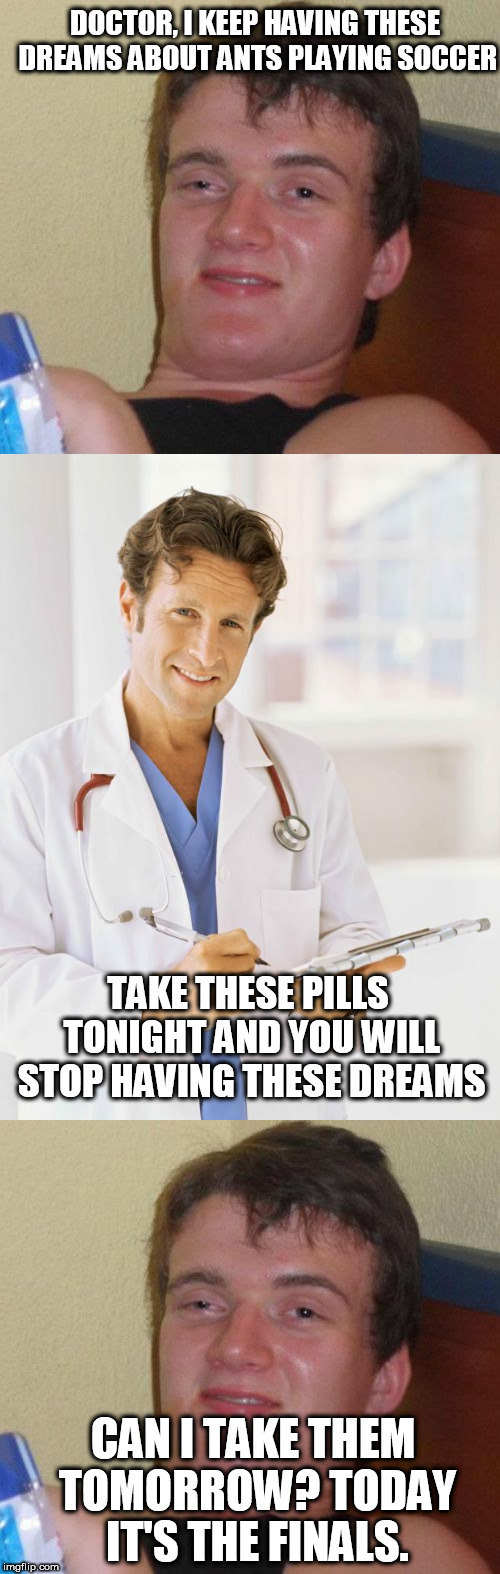 10 guy  | DOCTOR, I KEEP HAVING THESE DREAMS ABOUT ANTS PLAYING SOCCER; TAKE THESE PILLS TONIGHT AND YOU WILL STOP HAVING THESE DREAMS; CAN I TAKE THEM TOMORROW? TODAY IT'S THE FINALS. | image tagged in 10 guy,doctor | made w/ Imgflip meme maker